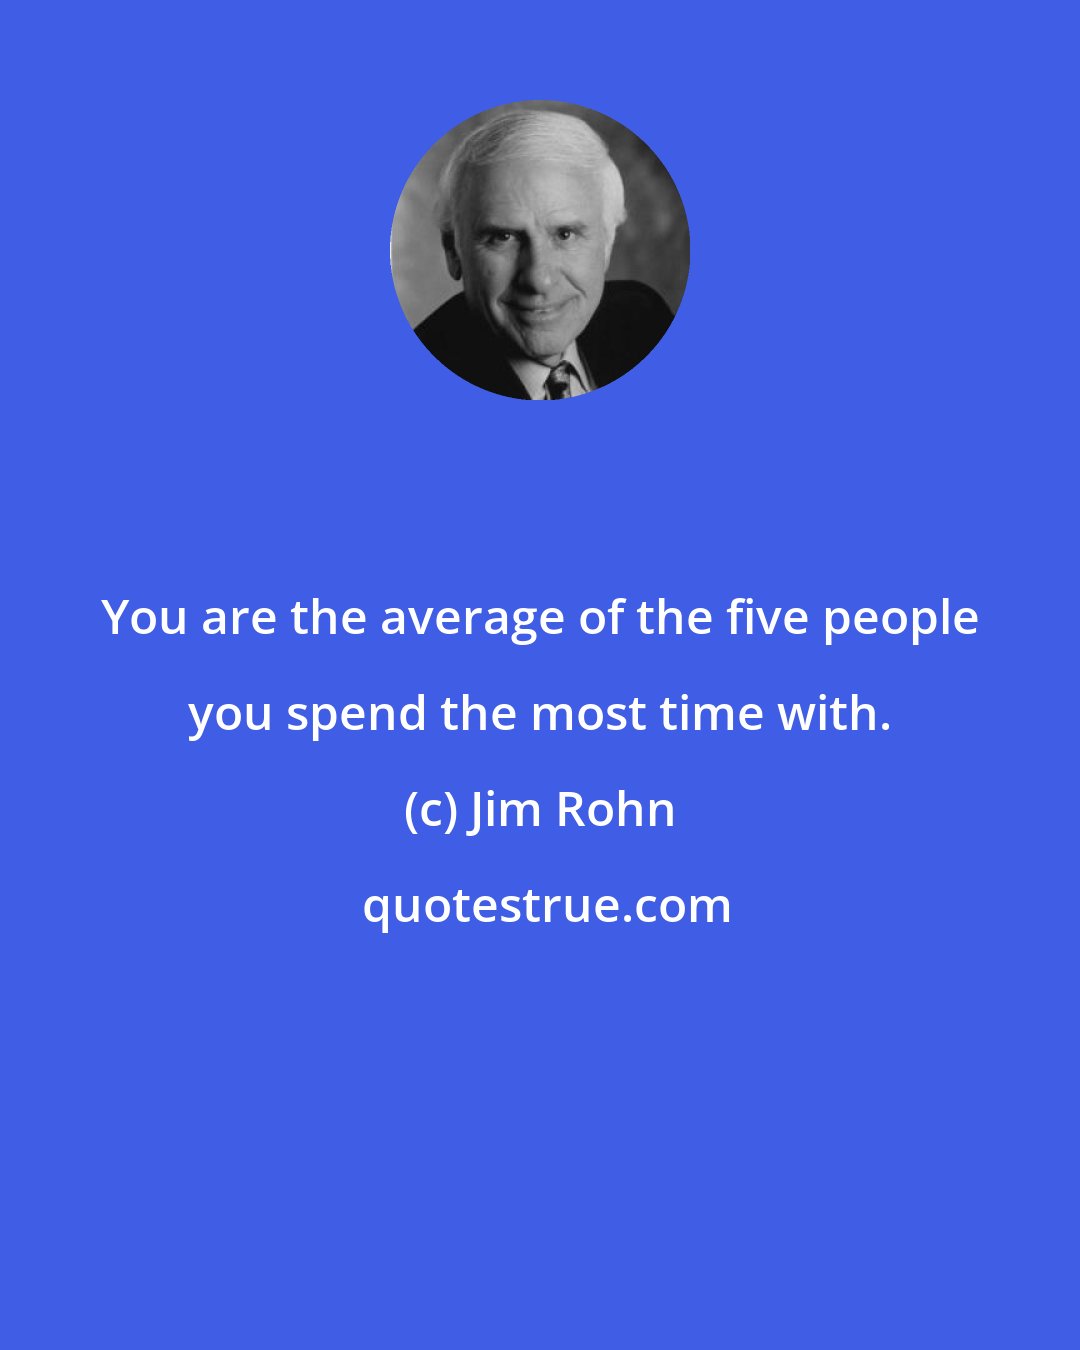 Jim Rohn: You are the average of the five people you spend the most time with.